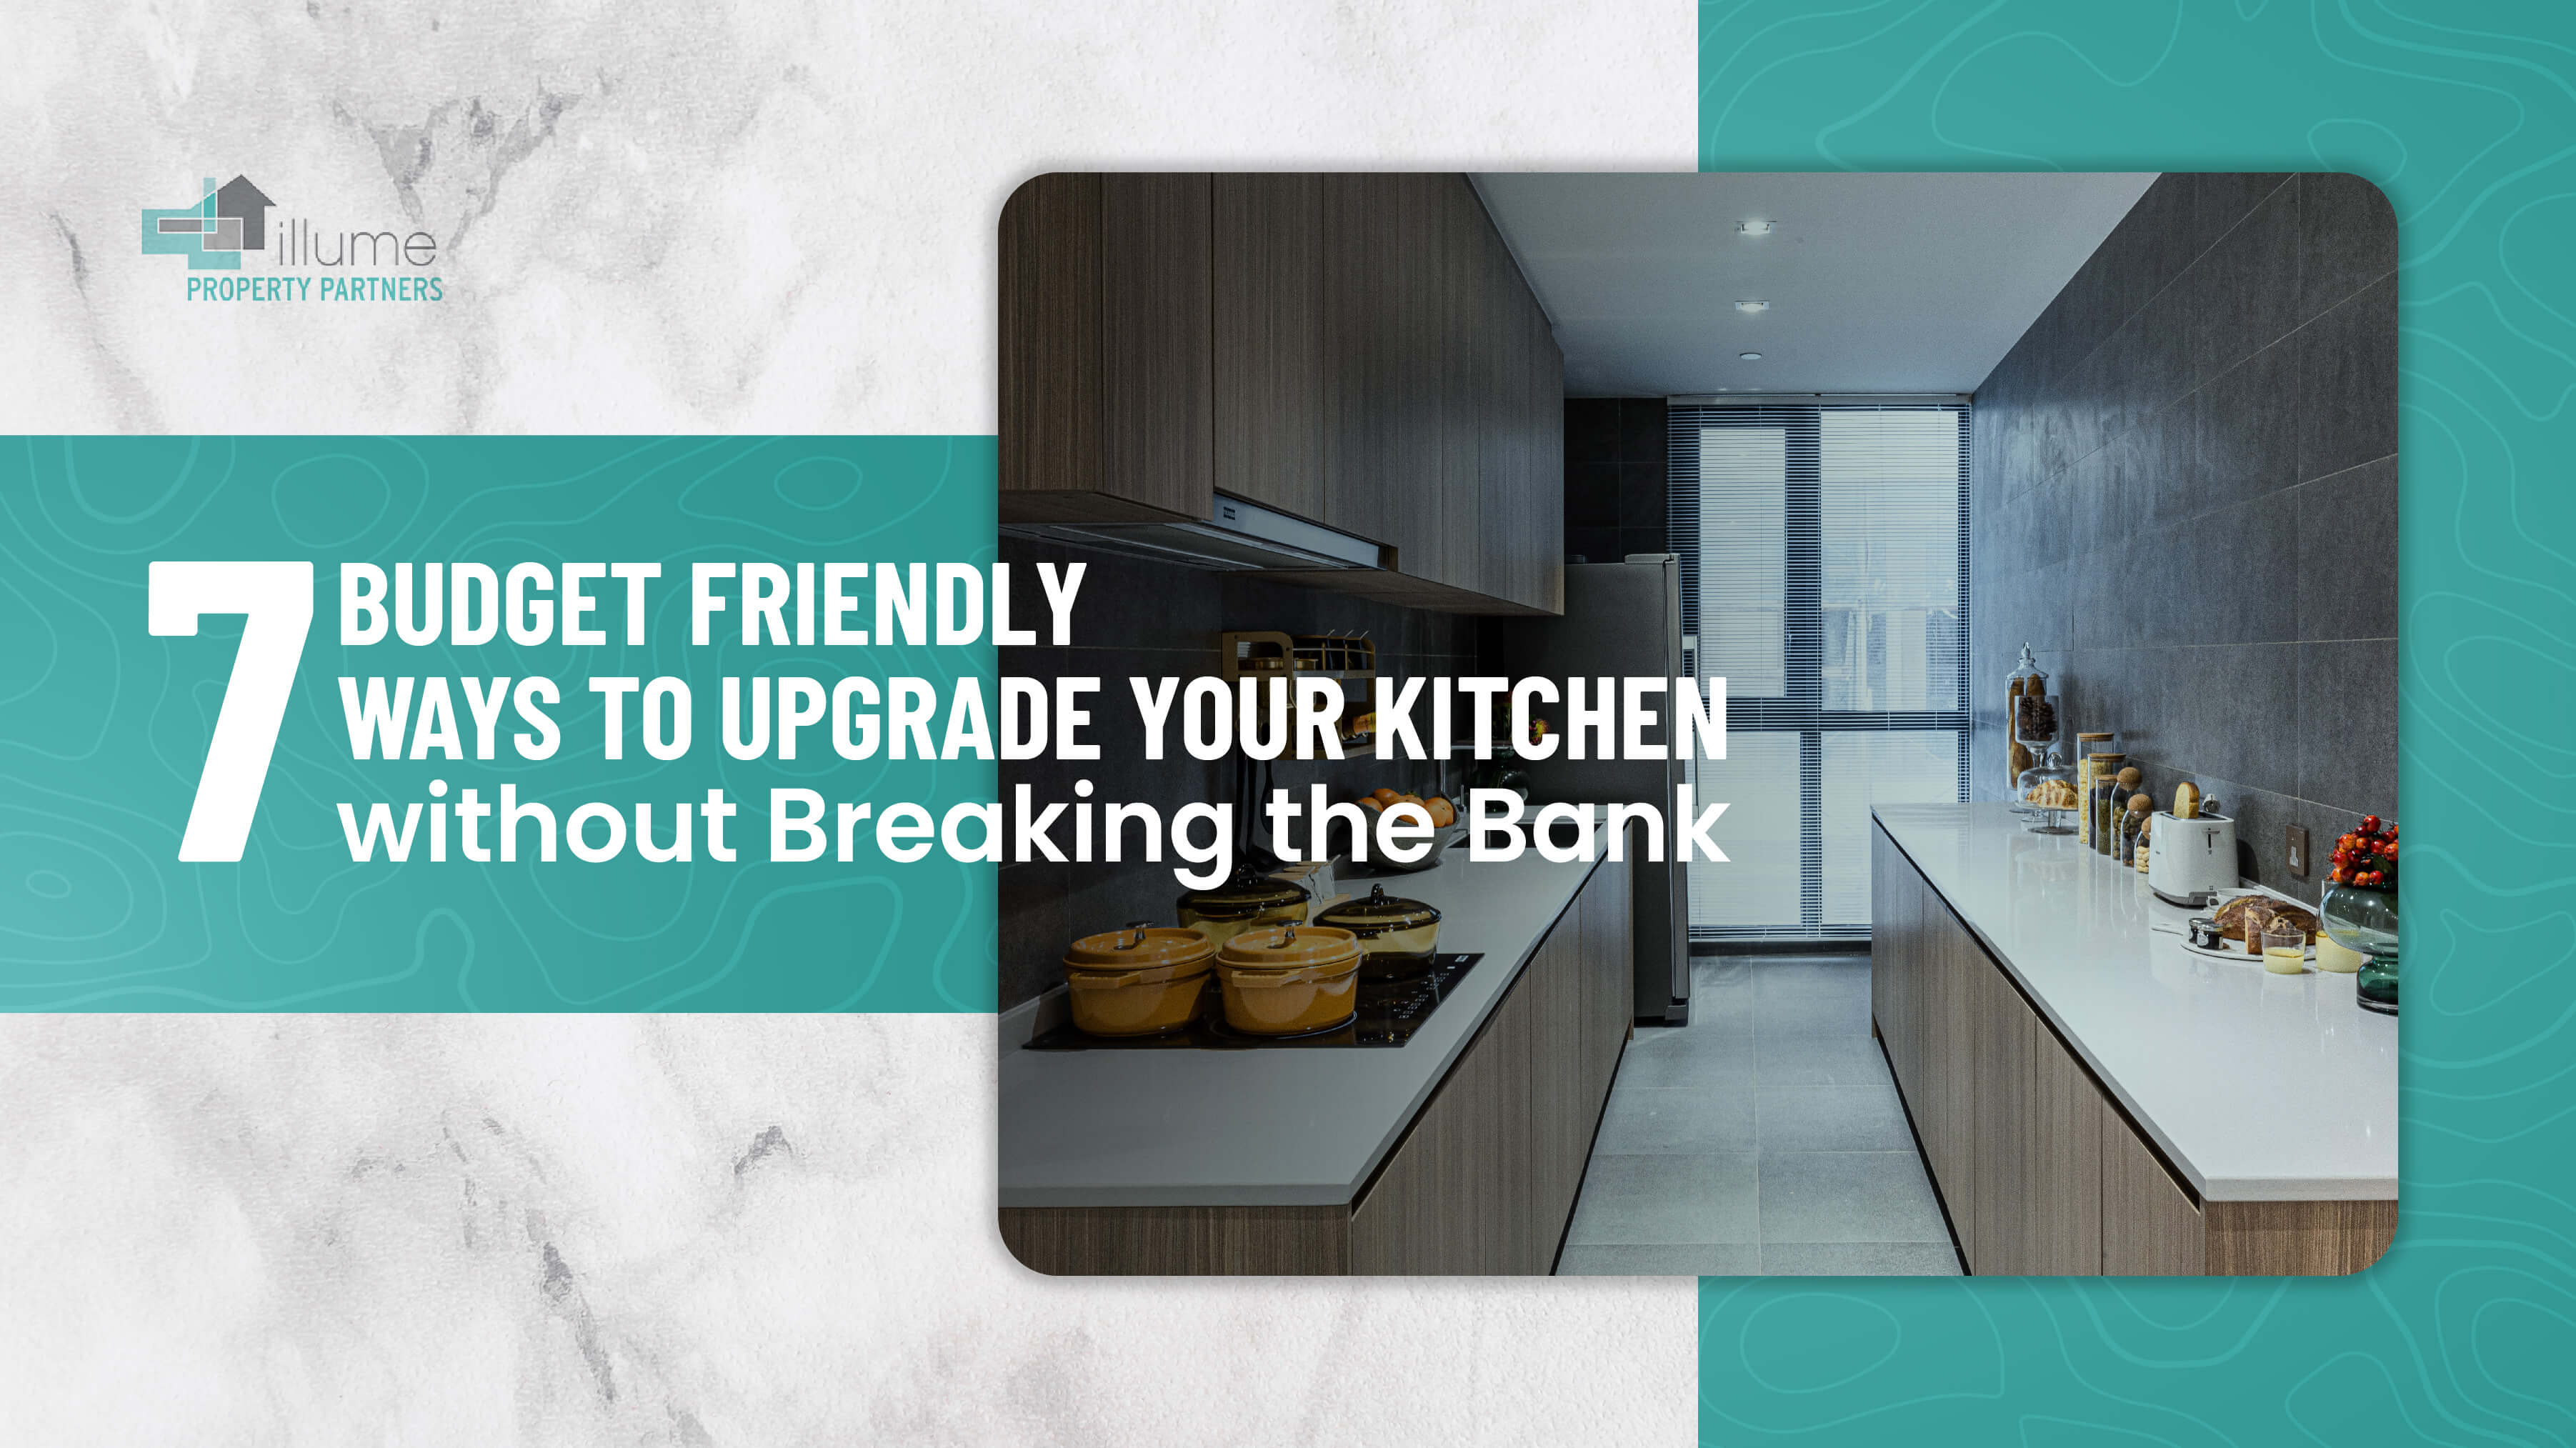 https://www.illumepm.com/images/blog/7%20Budget%20Friendly%20Ways%20to%20Upgrade%20Your%20Kitchen%20Without%20Breaking%20the%20Bank.jpg